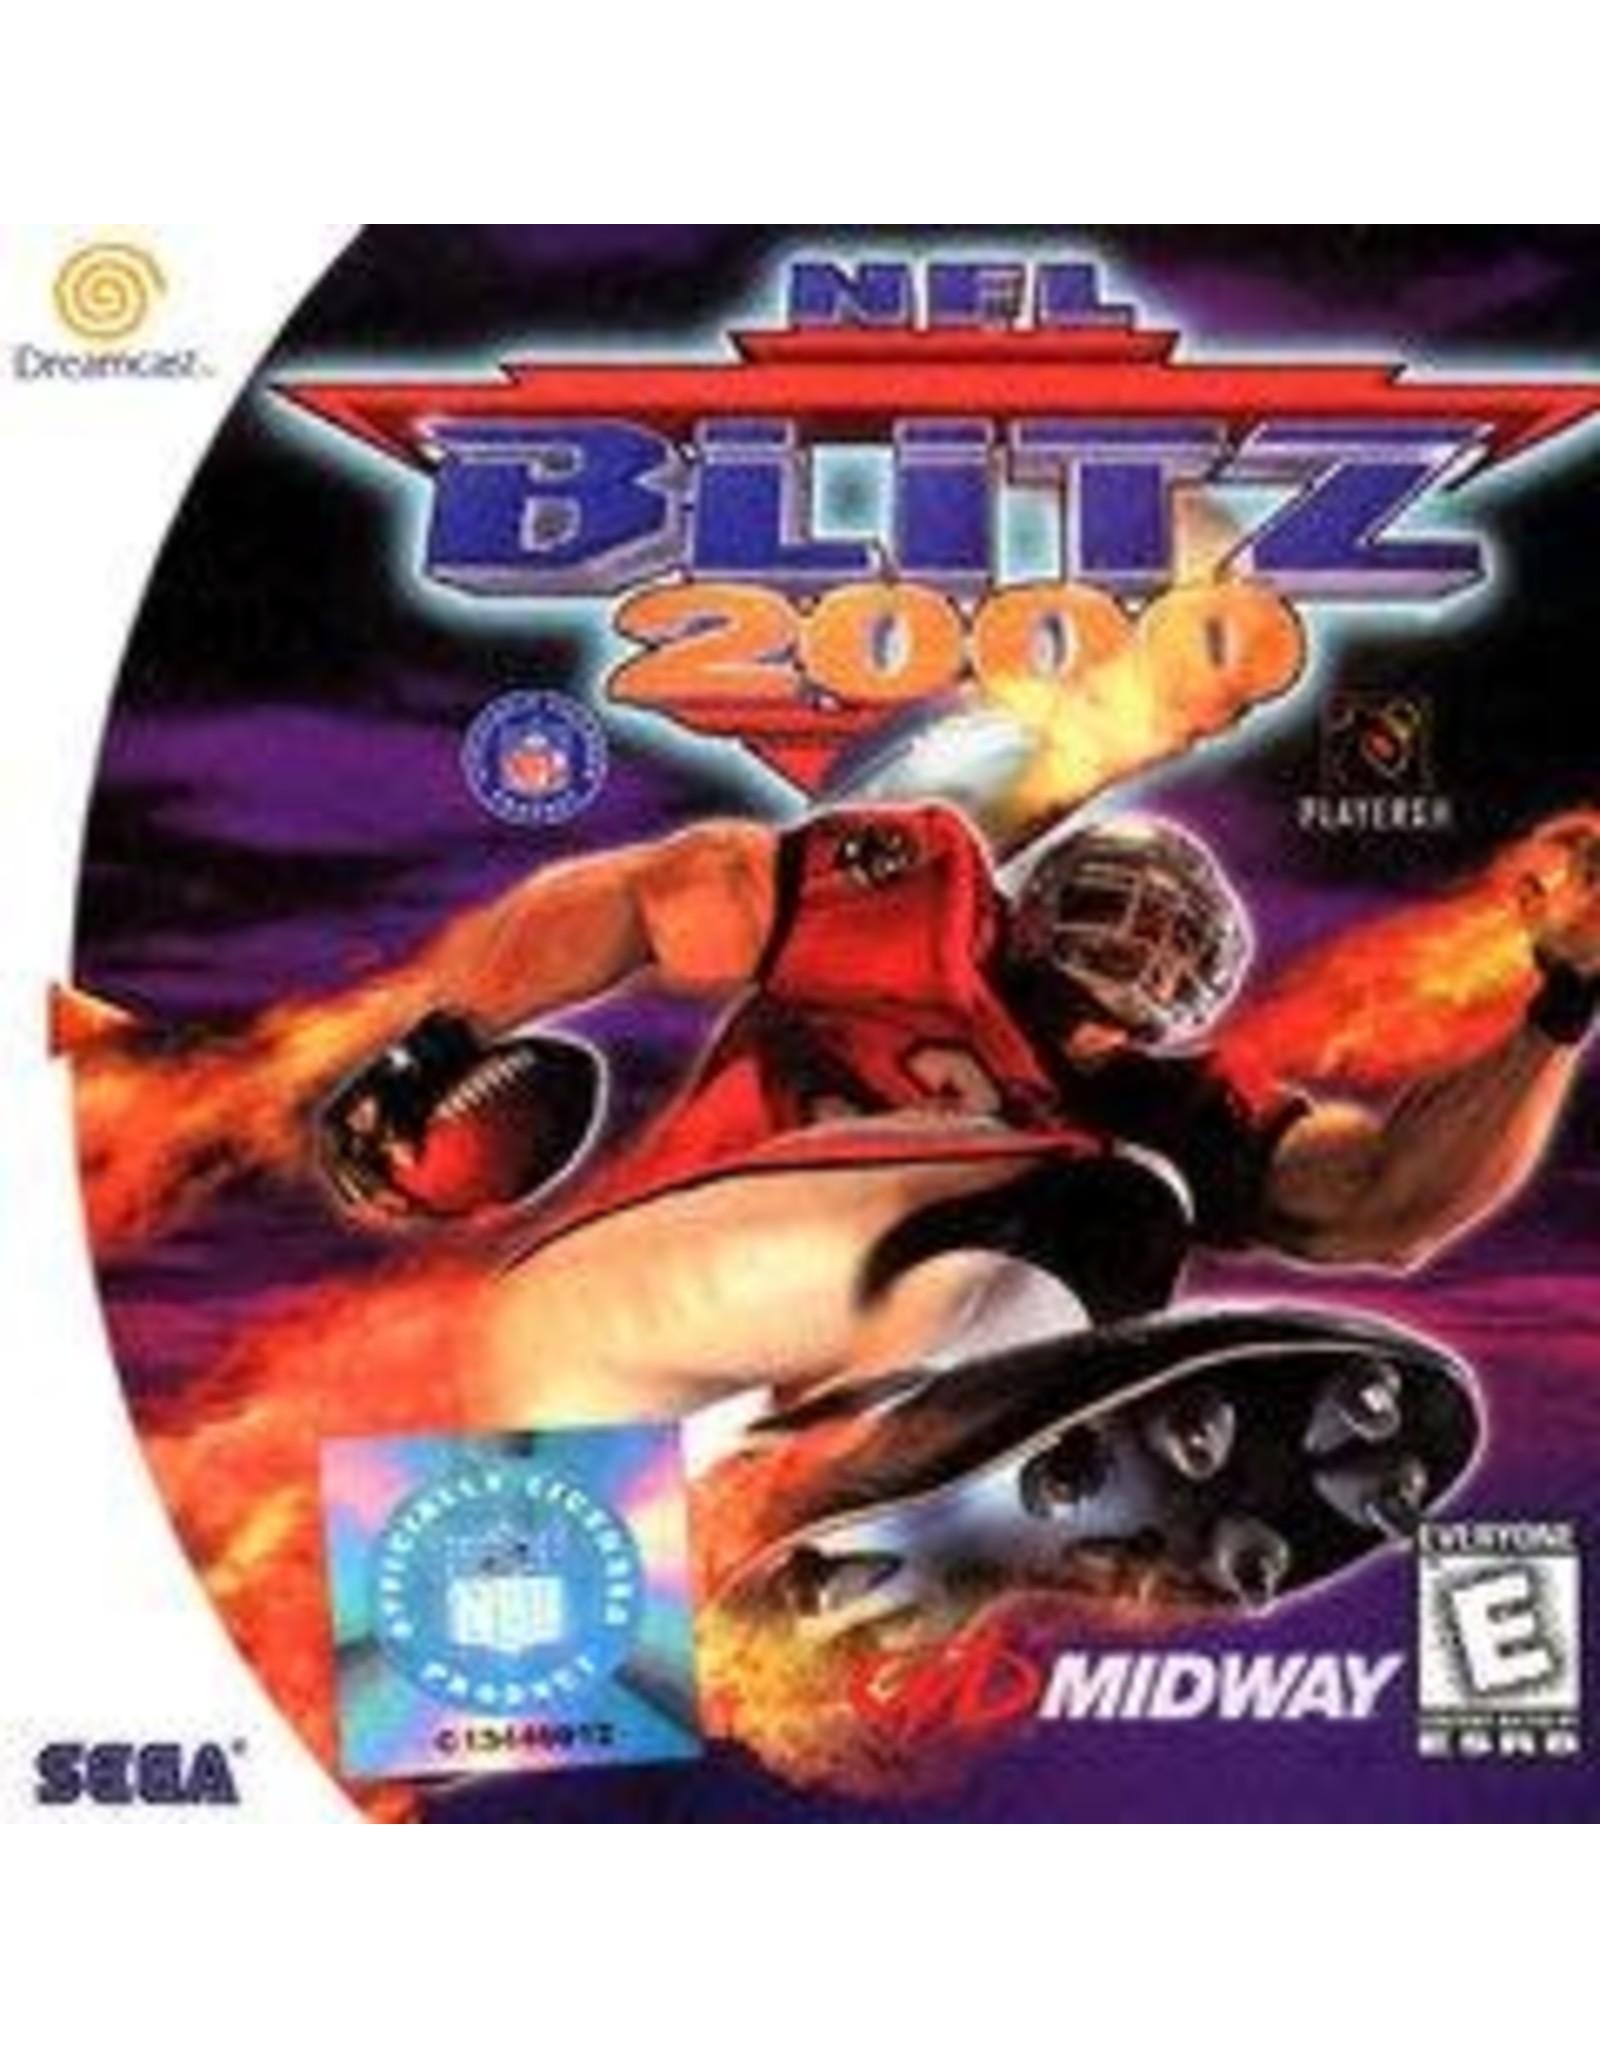 Sega Dreamcast NFL Blitz 2000 (Disc Only, Writing and Sticker on Disc)